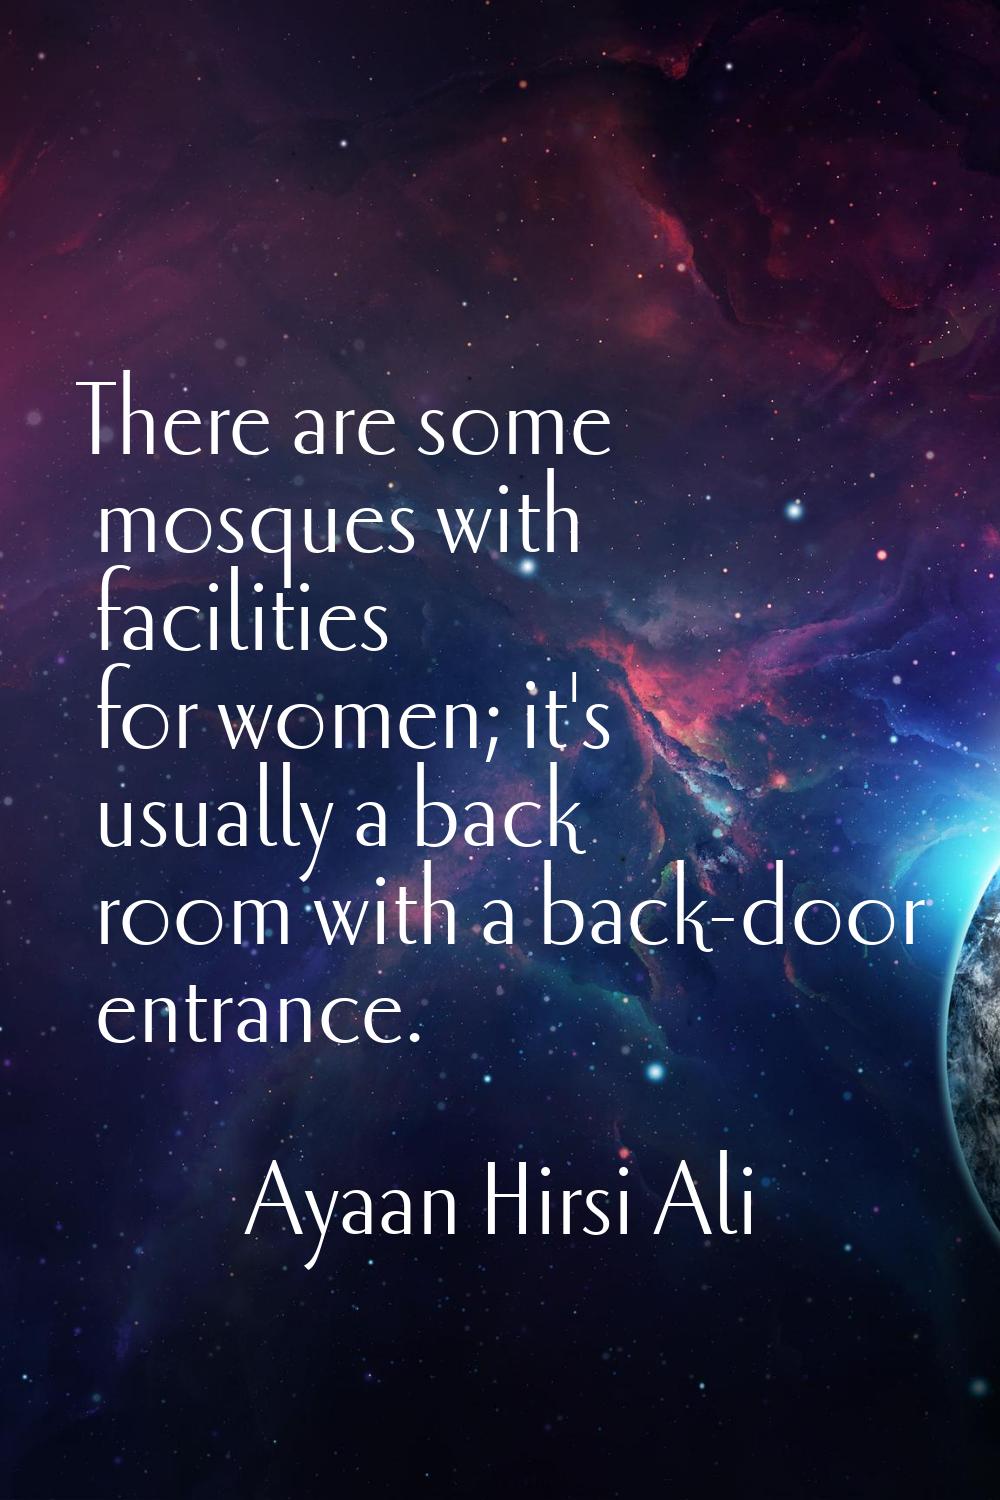 There are some mosques with facilities for women; it's usually a back room with a back-door entranc